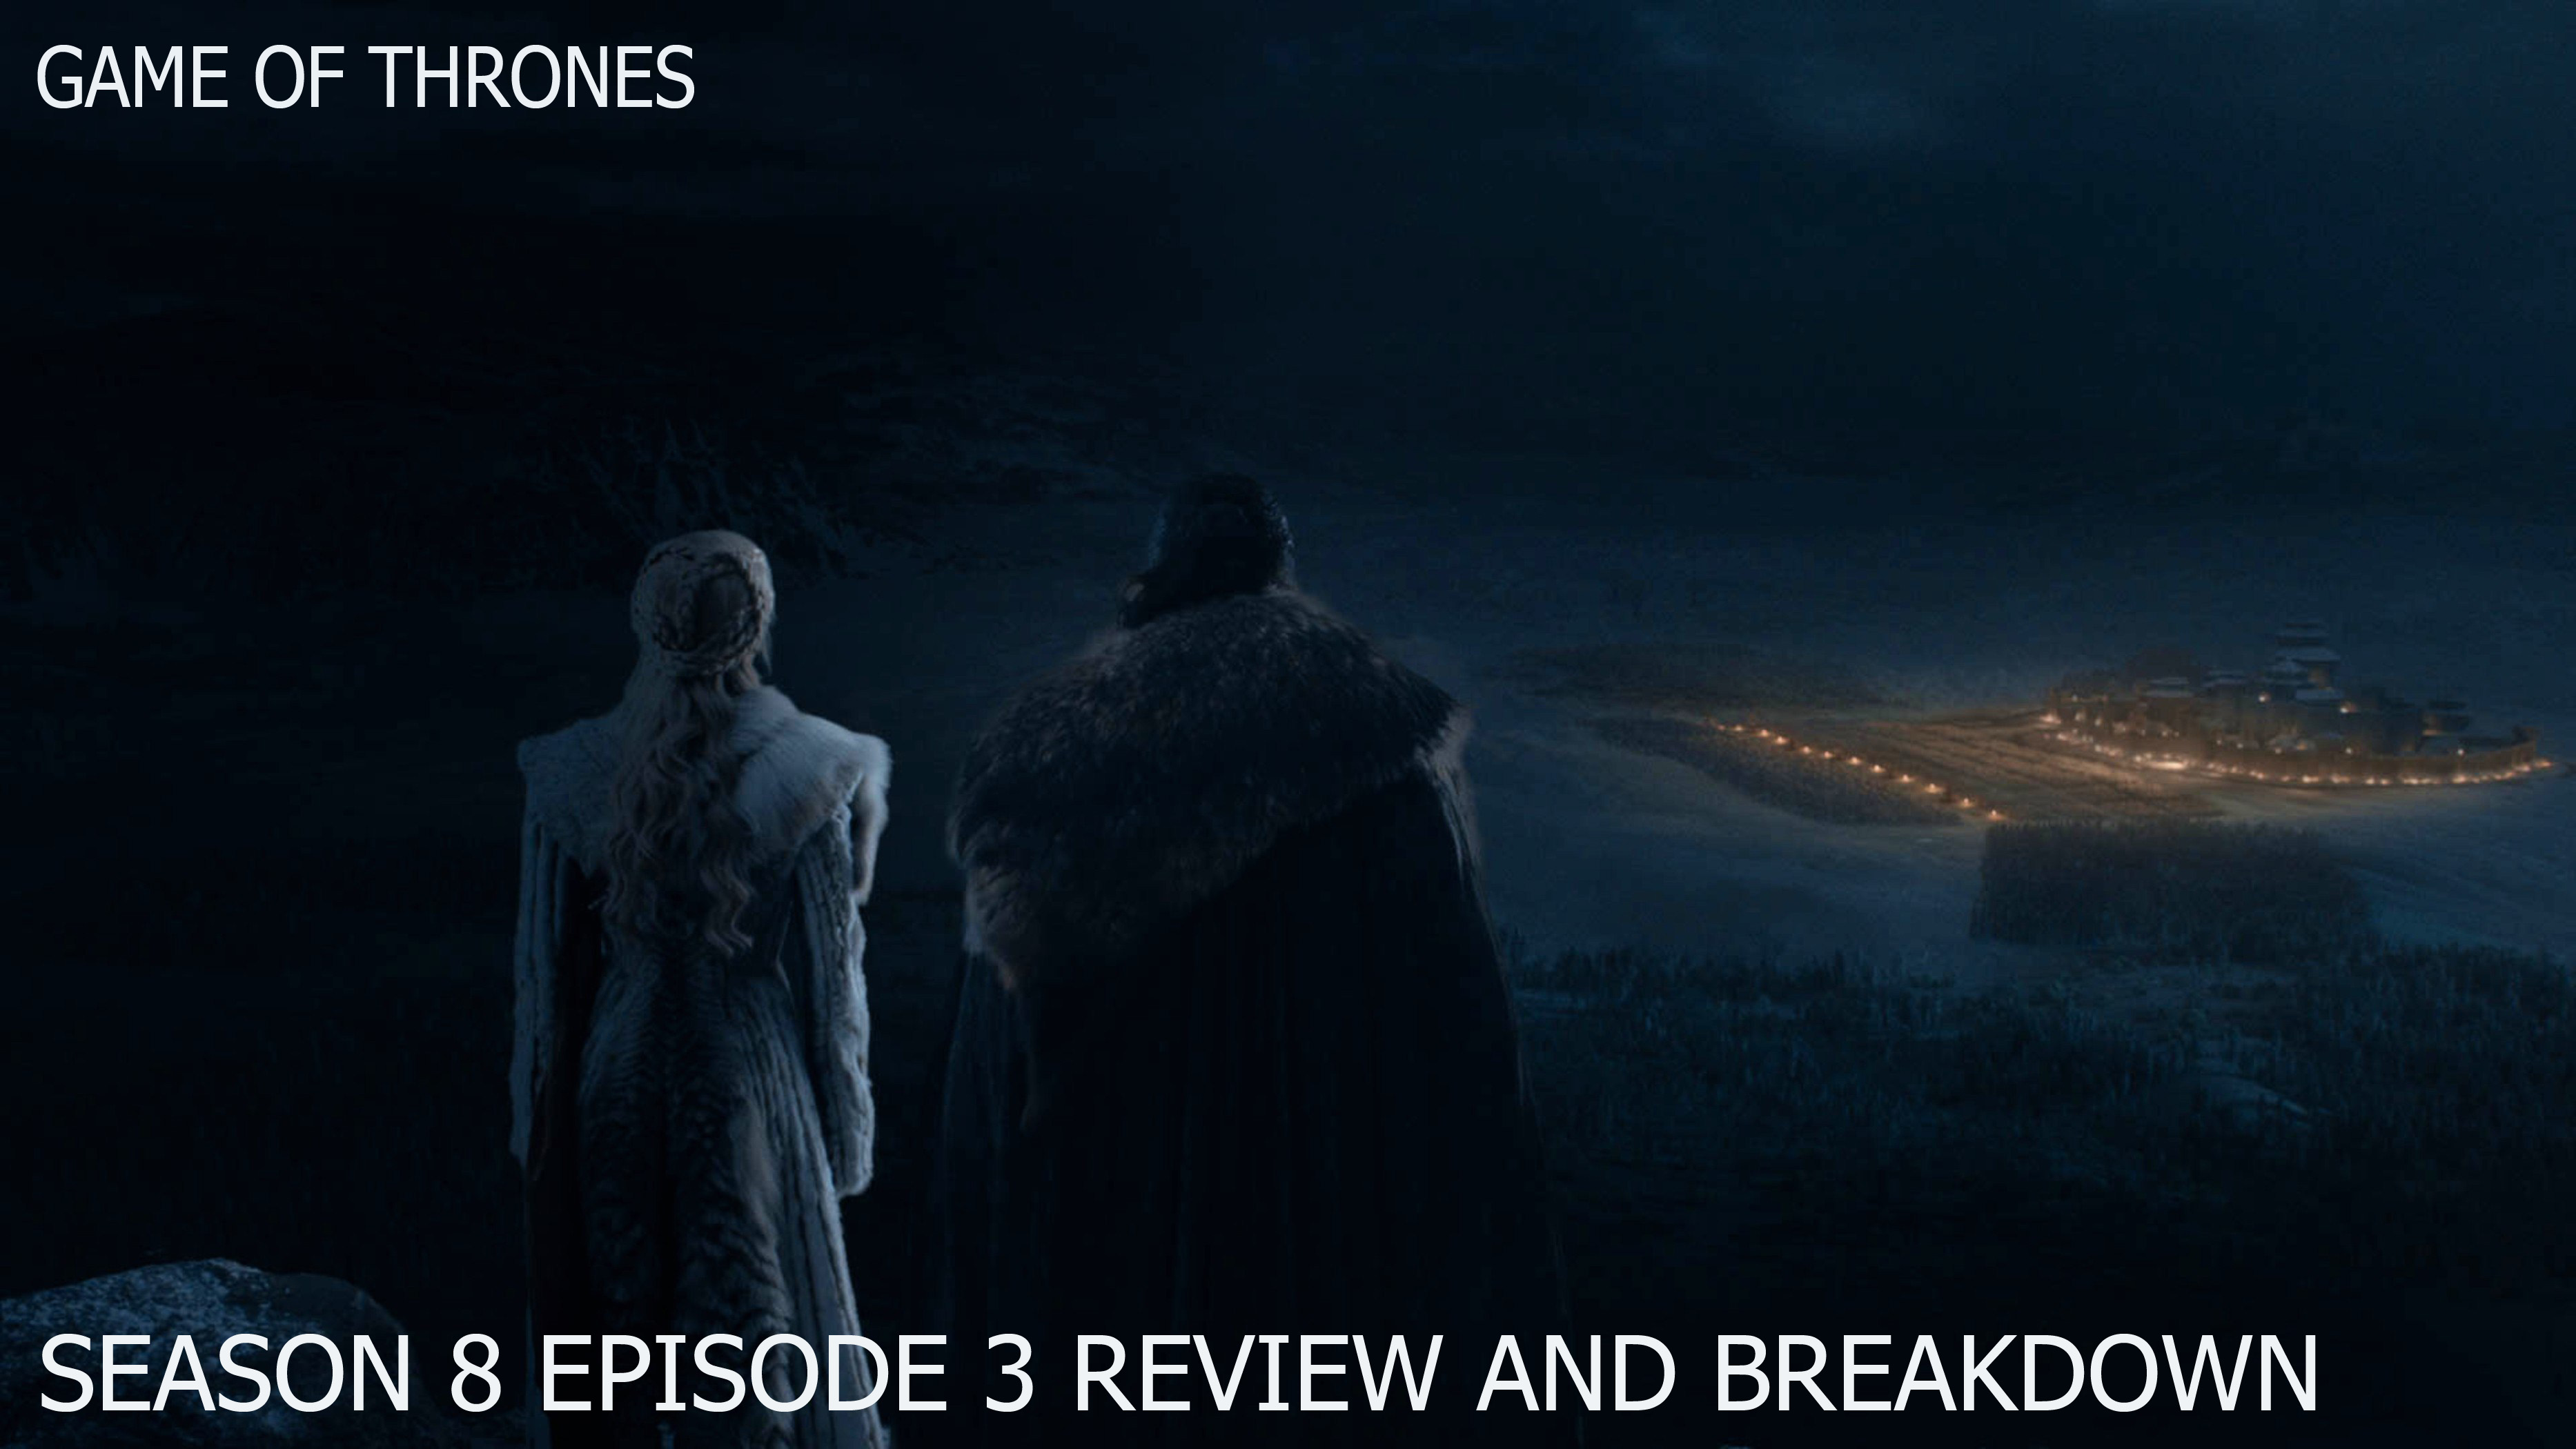 Game of Thrones Season 8 Episode 3 (Battle of Winterfell) Full Review